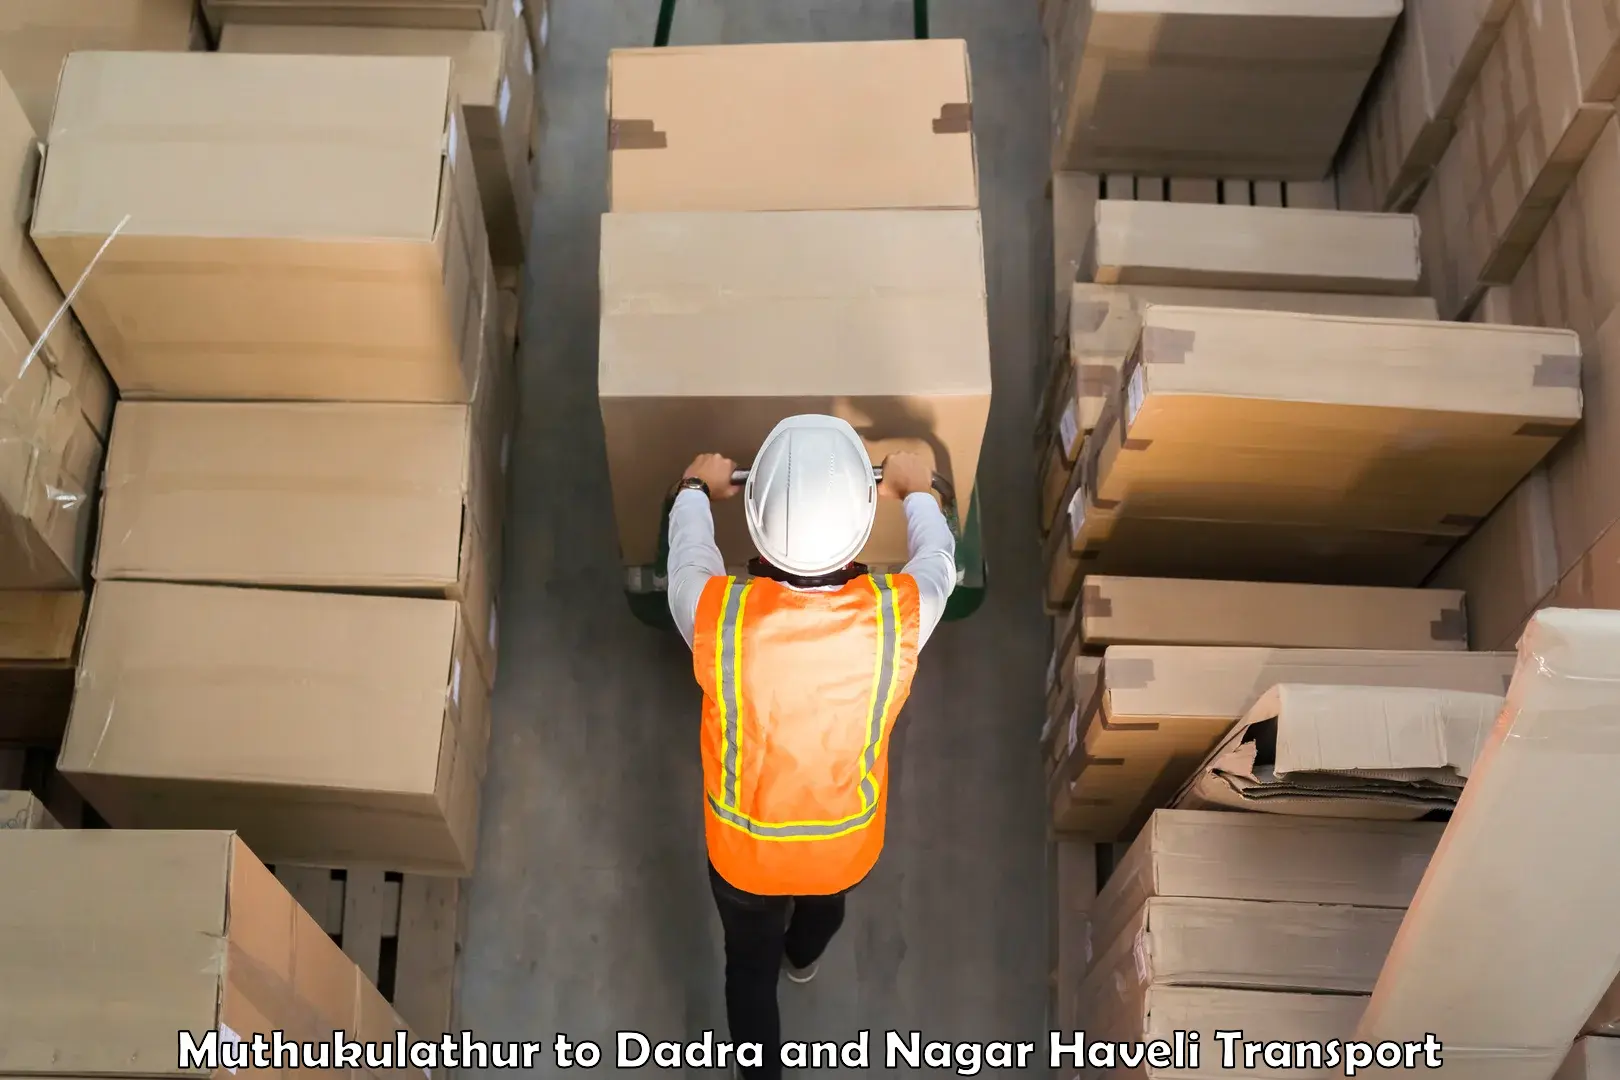 Truck transport companies in India Muthukulathur to Dadra and Nagar Haveli